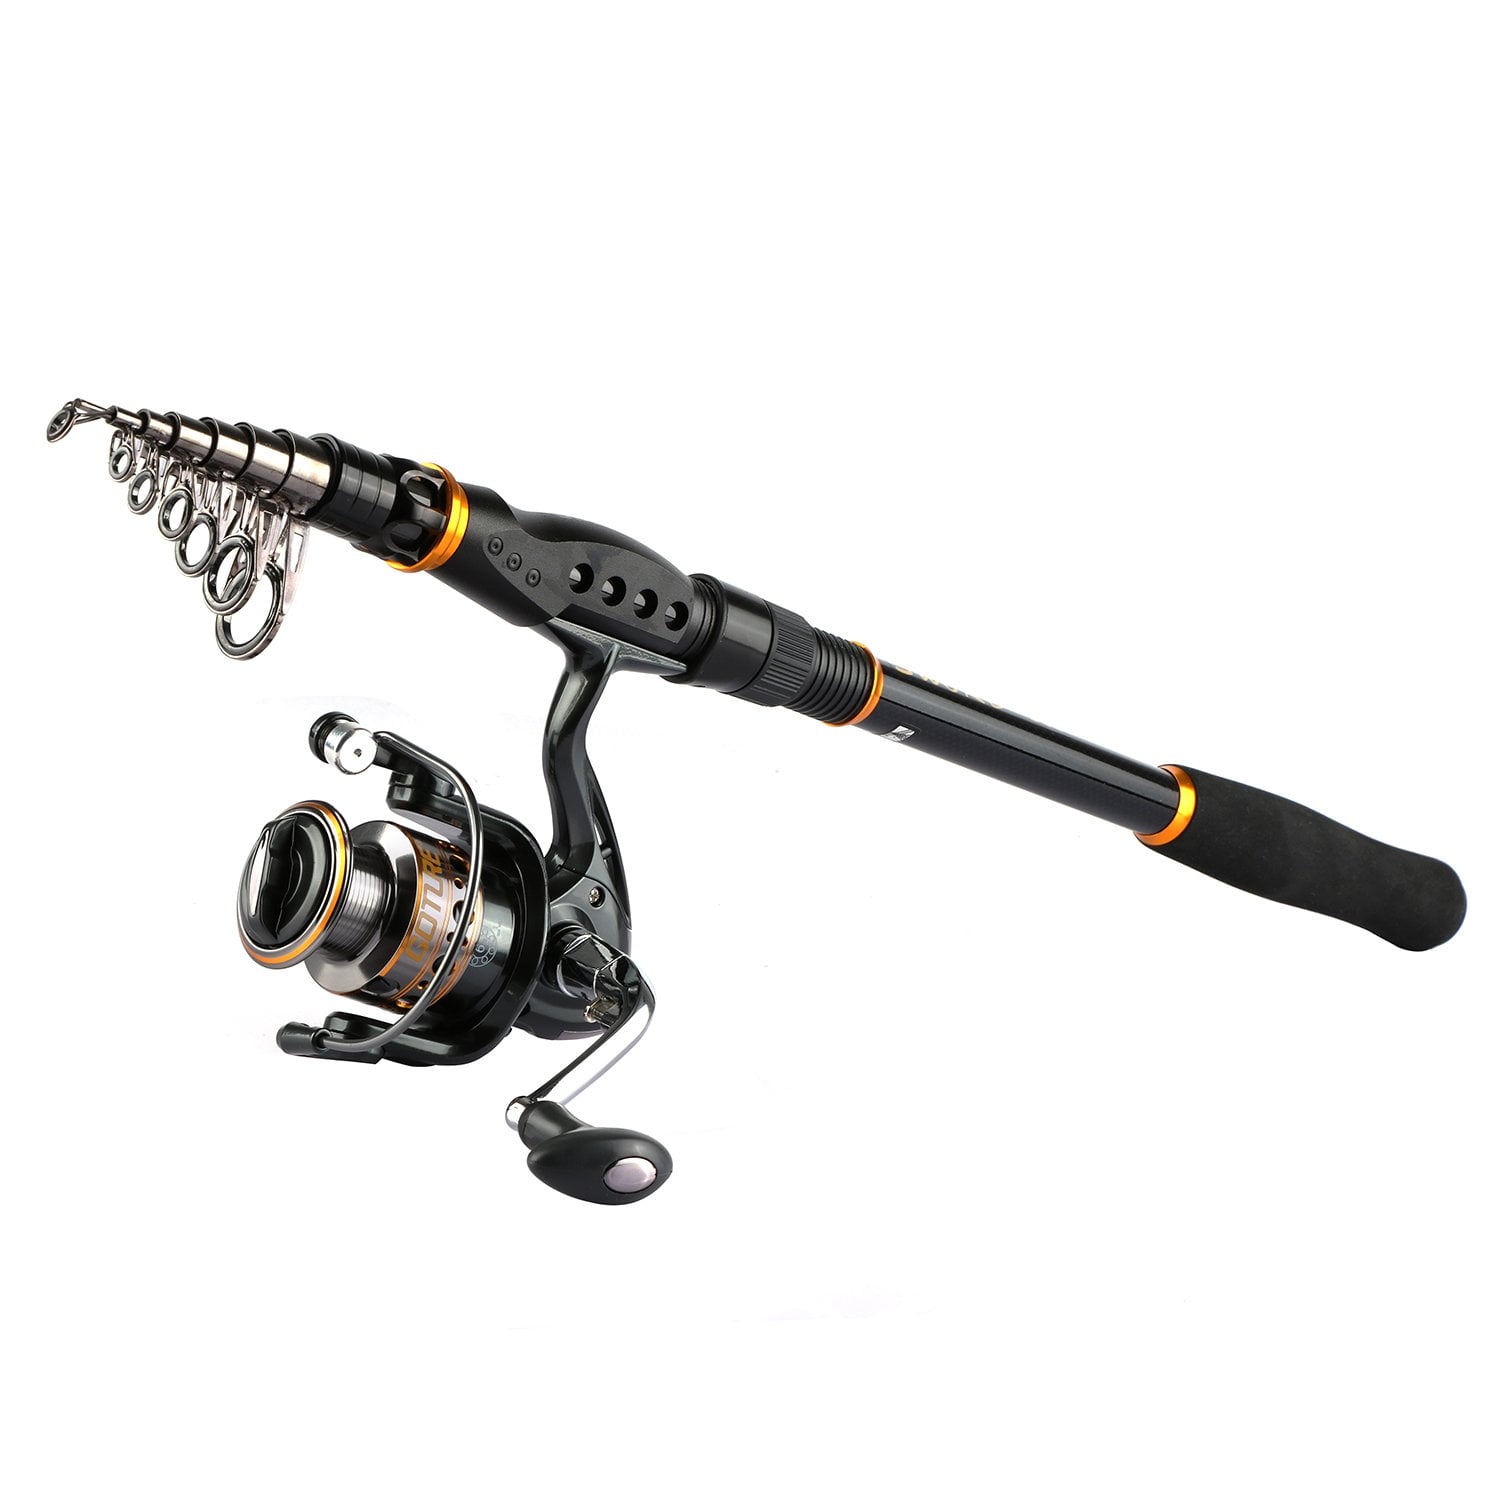 Delicate Paint Coating Fishing Pole Stable And Durable Fishing Pole For  Outdoor Fishing Enthusiasts 